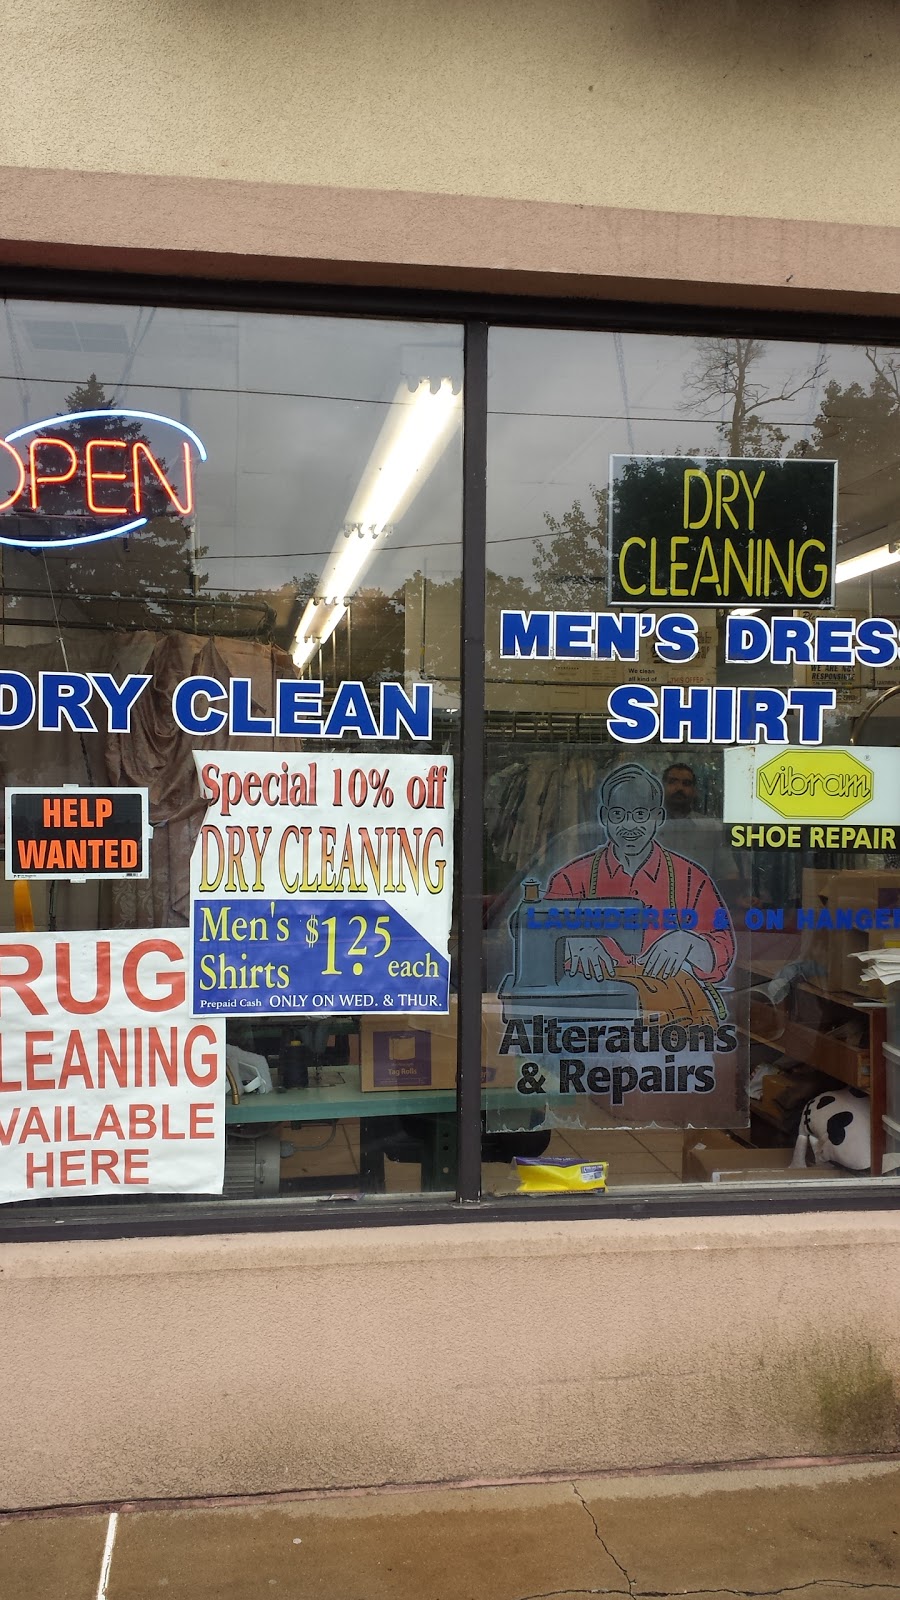 A1 Dry Cleaners | 244 Lincoln Blvd, Middlesex, NJ 08846 | Phone: (732) 748-0888